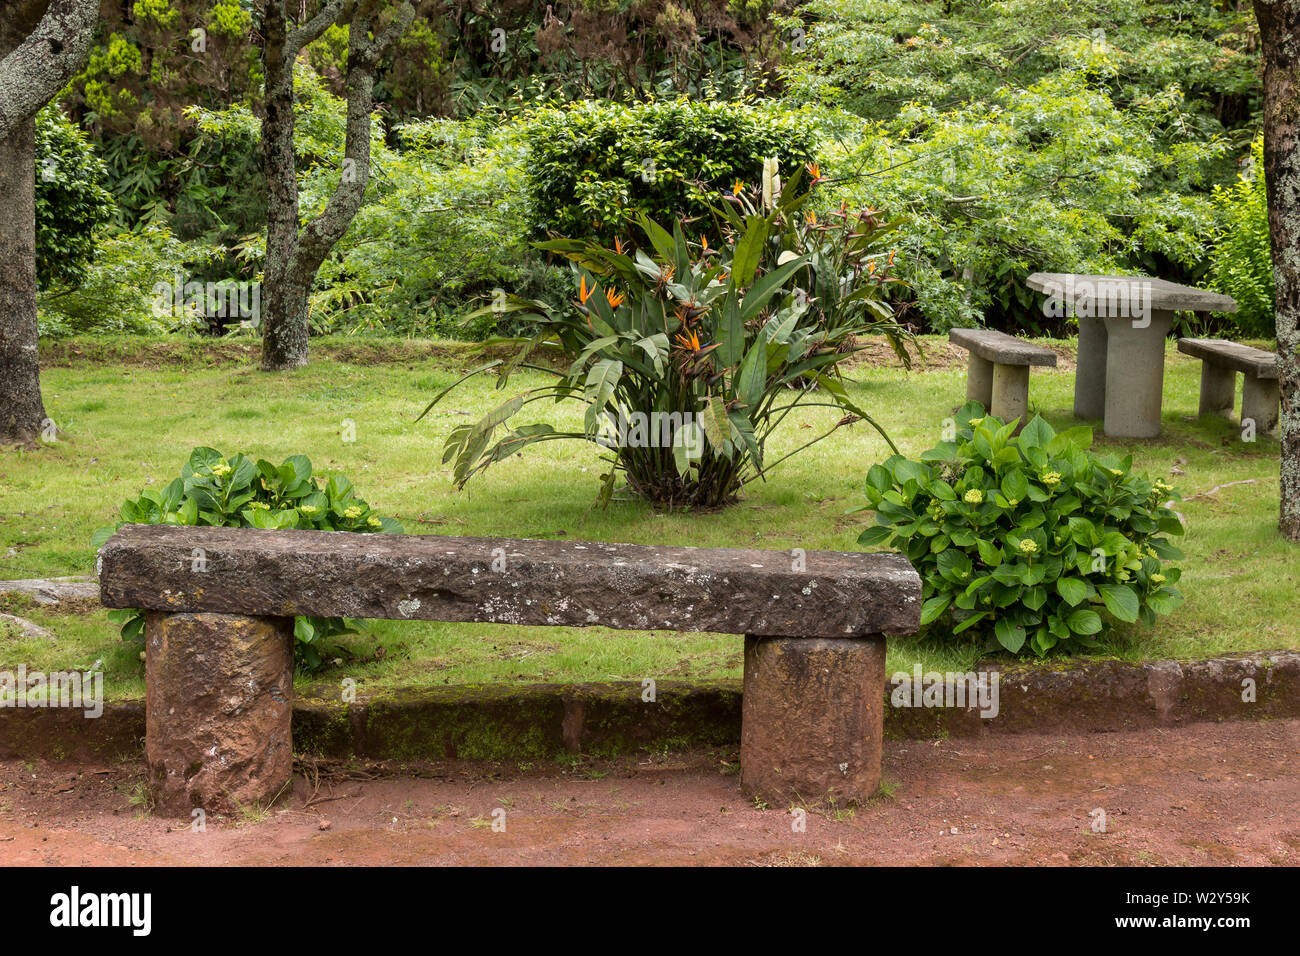 Stone bench at the edge of a grass at a resting area for travellers. Beautiful plants and flowers in the grass.  Sao Miguel, Azores Islands, Portugal. Stock Photo